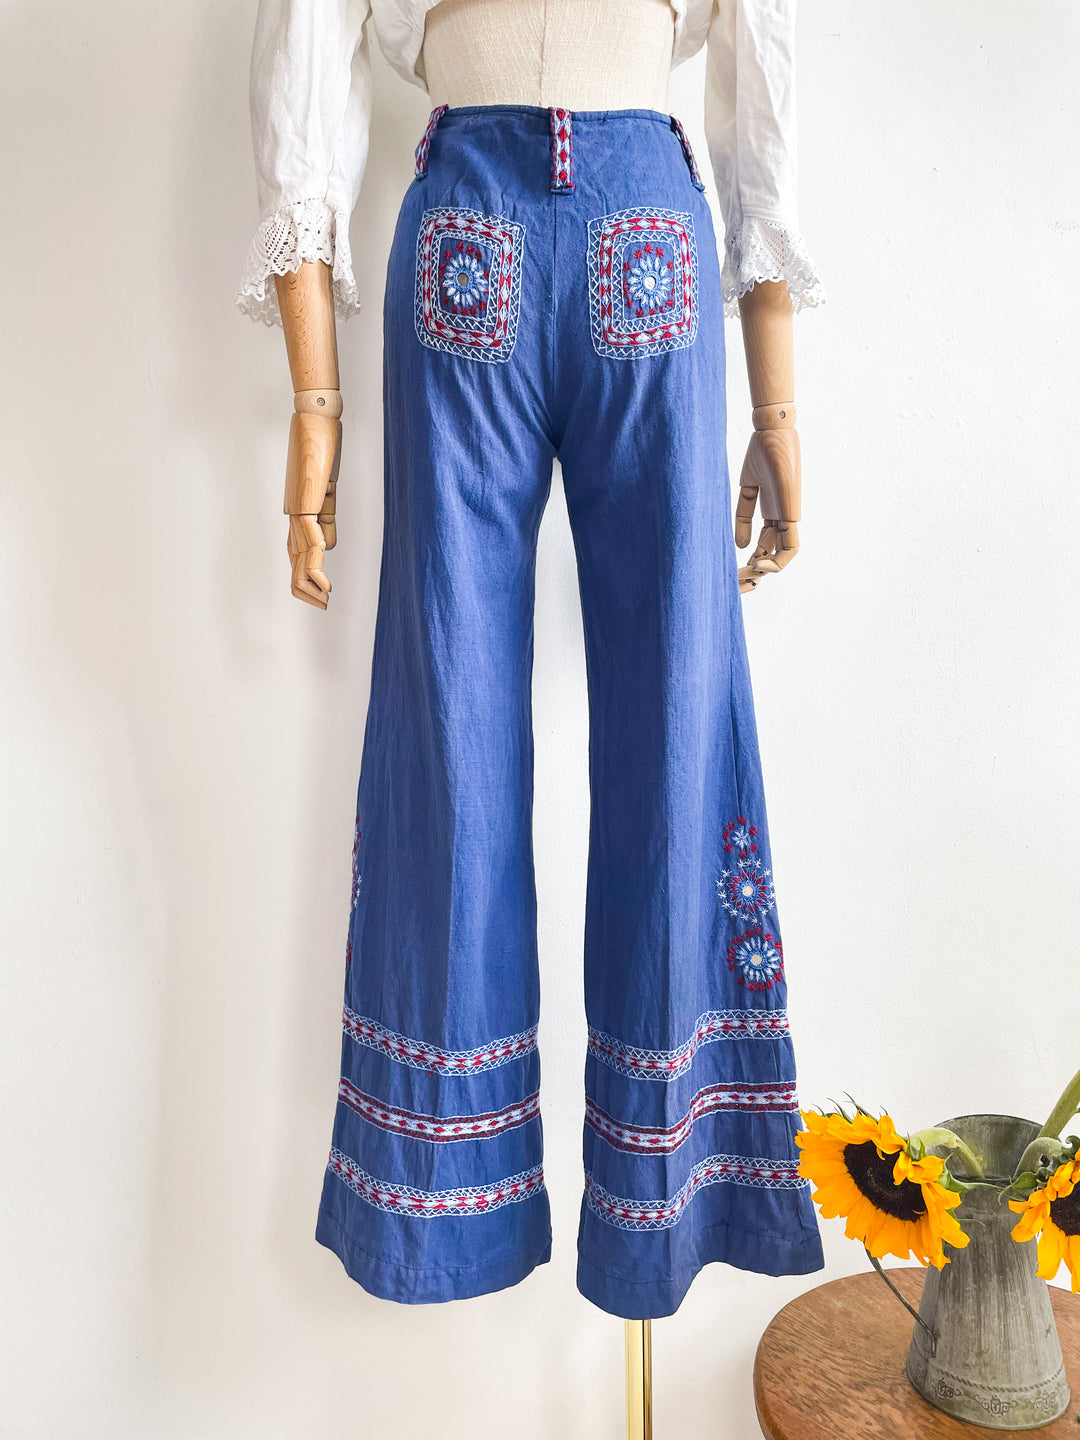 The Janis 70s Flares